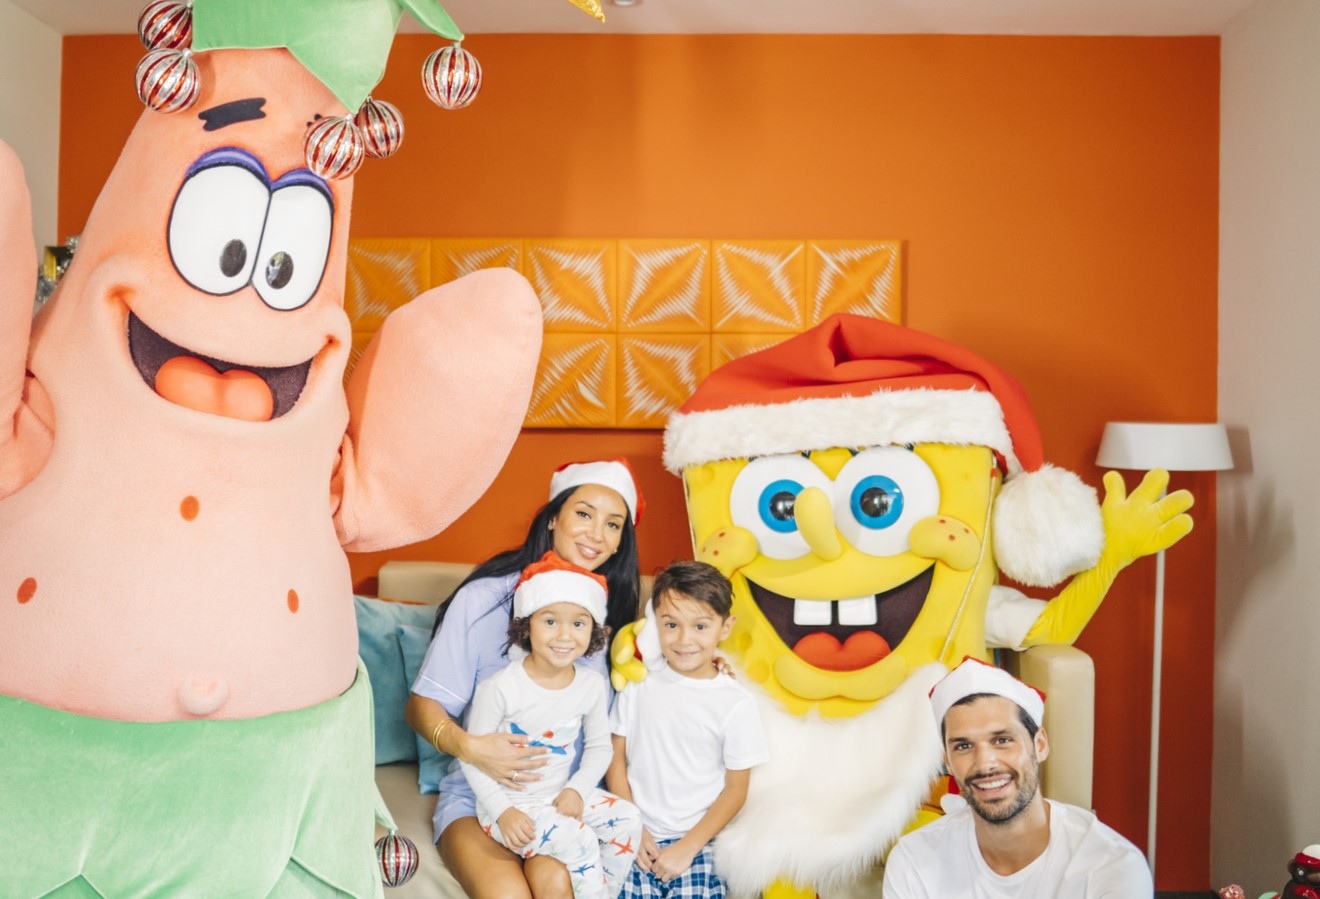 Spongebob and Patrick posing with a family in Santa hats